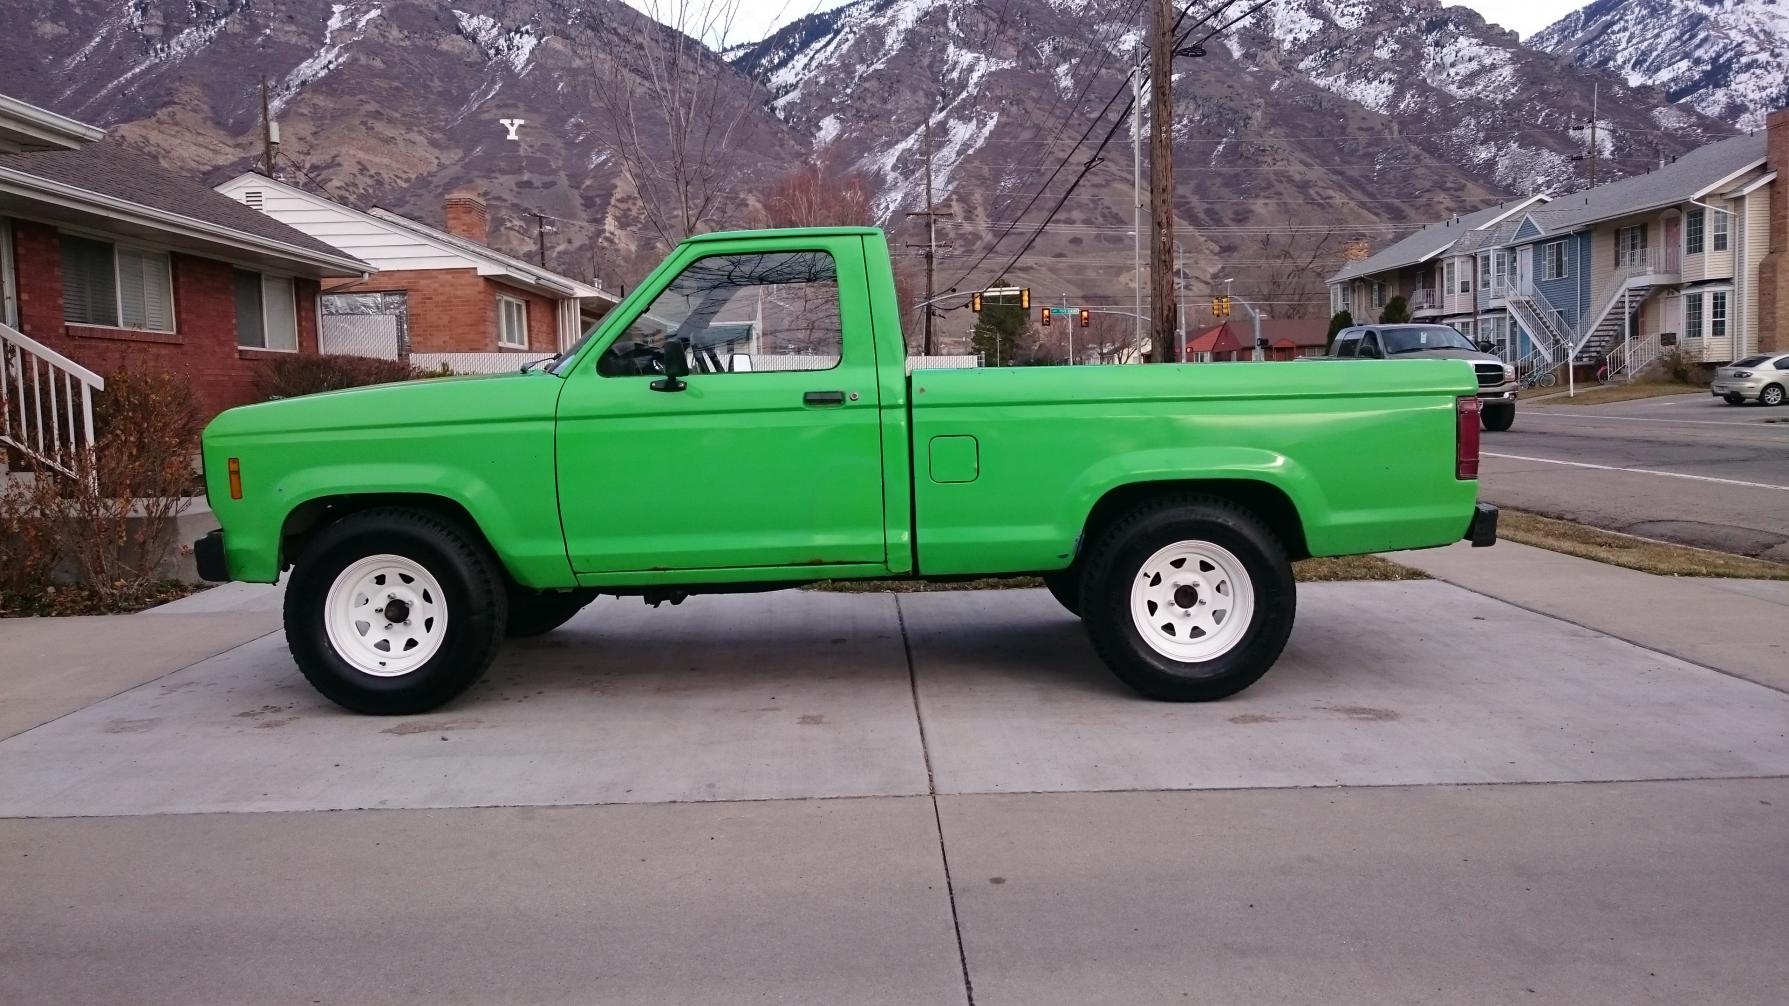 BangShift Project Files: This 1988 Ford Ranger Is Now Packing A Turbocharged Nissan RB20DET!